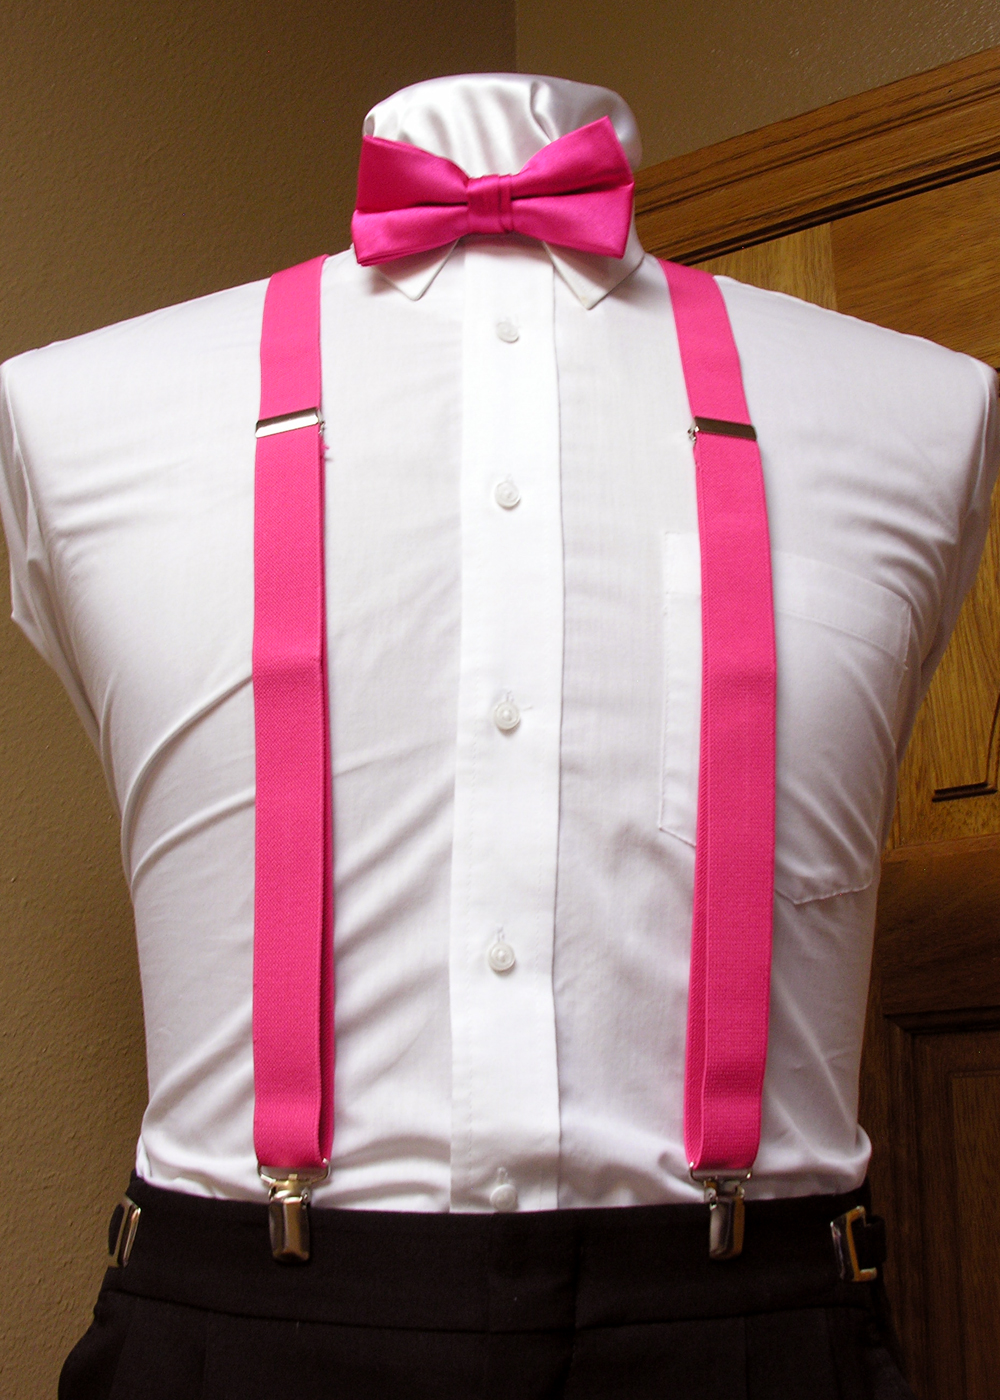 Spencer J's Fuchsia / Hot Pink Matching Bow Tie and Suspender set 1" Men's X Back Clip Spencer J's